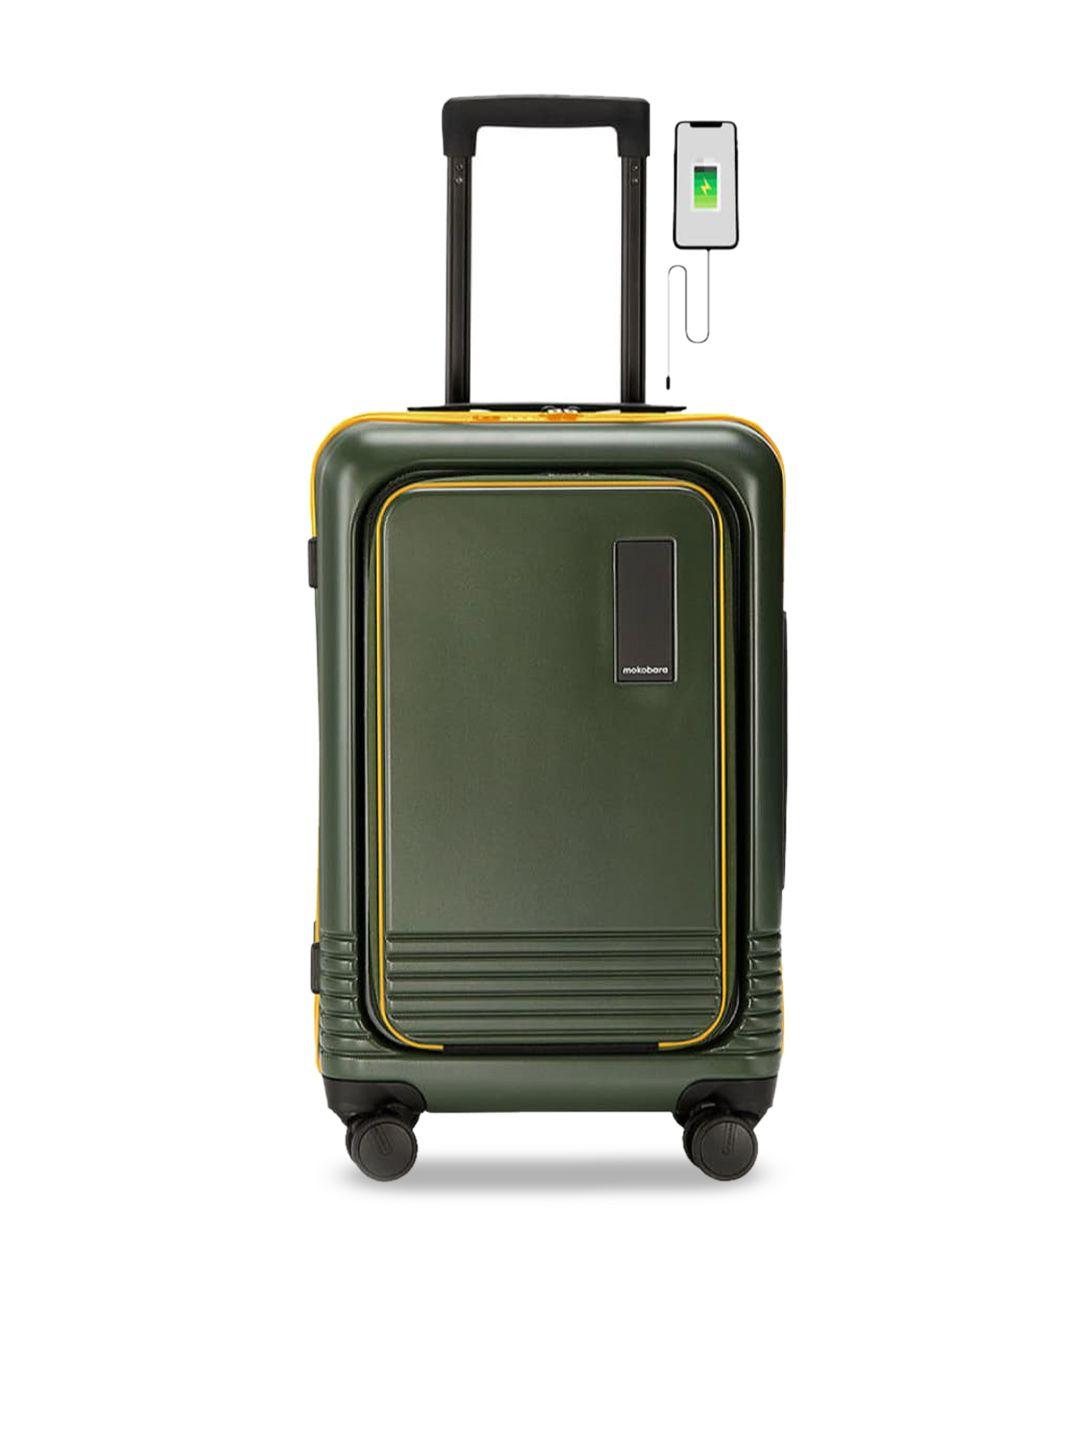 mokobara the cabin pro usb charging point on the top hard-sided cabin trolley suitcase